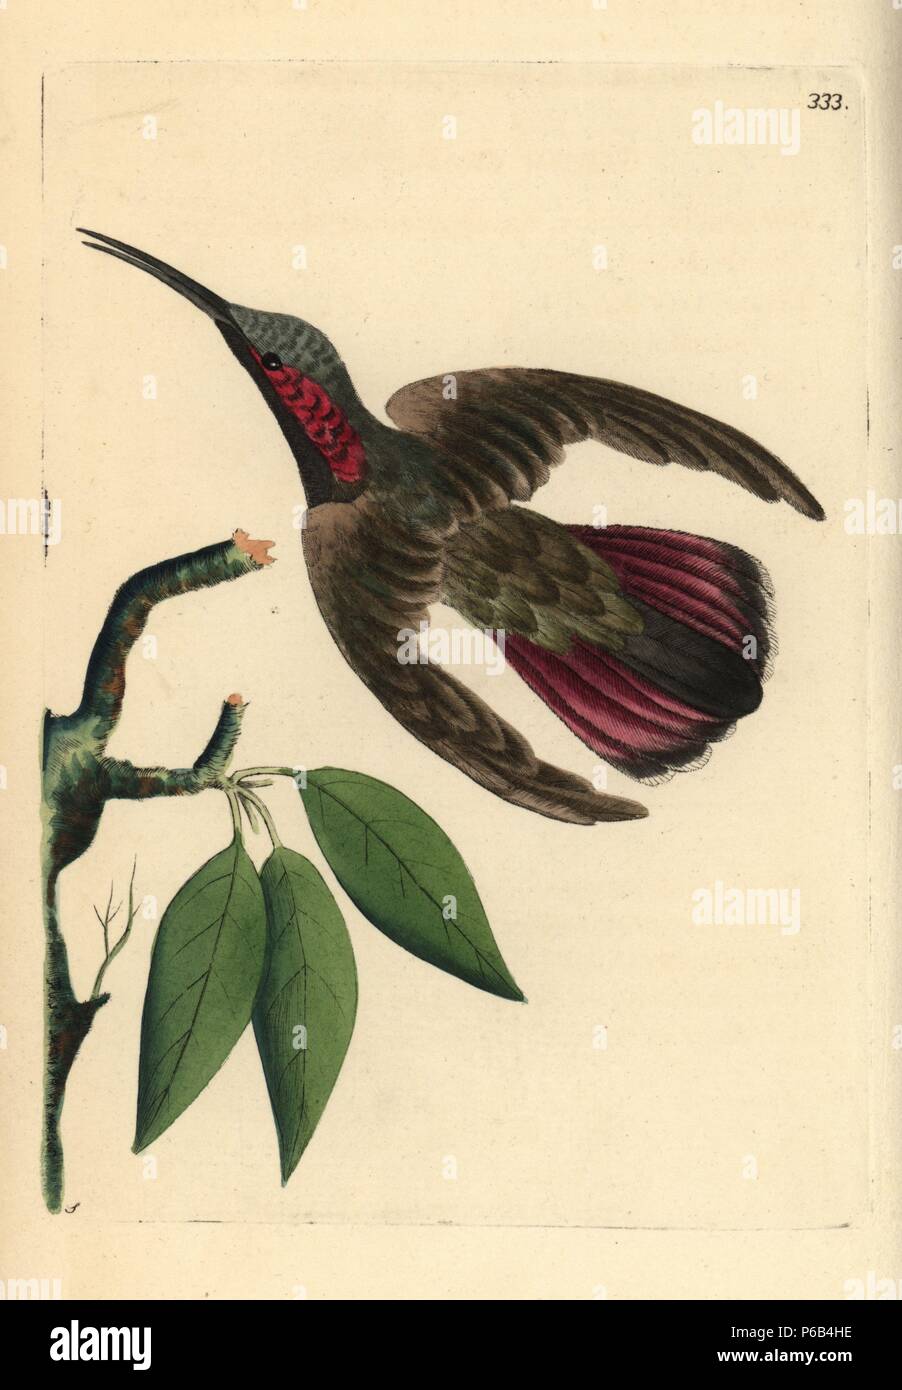 Green-throated mango hummingbird, Anthracothorax viridigula. Illustration drawn by George Shaw. Handcolored copperplate engraving from George Shaw and Frederick Nodder's 'The Naturalist's Miscellany,' London, 1798. Most of the 1,064 illustrations of animals, birds, insects, crustaceans, fishes, marine life and microscopic creatures were drawn by George Shaw, Frederick Nodder and Richard Nodder, and engraved and published by the Nodder family. Frederick drew and engraved many of the copperplates until his death around 1800, and son Richard (17741823) was responsible for the plates signed RN or Stock Photo